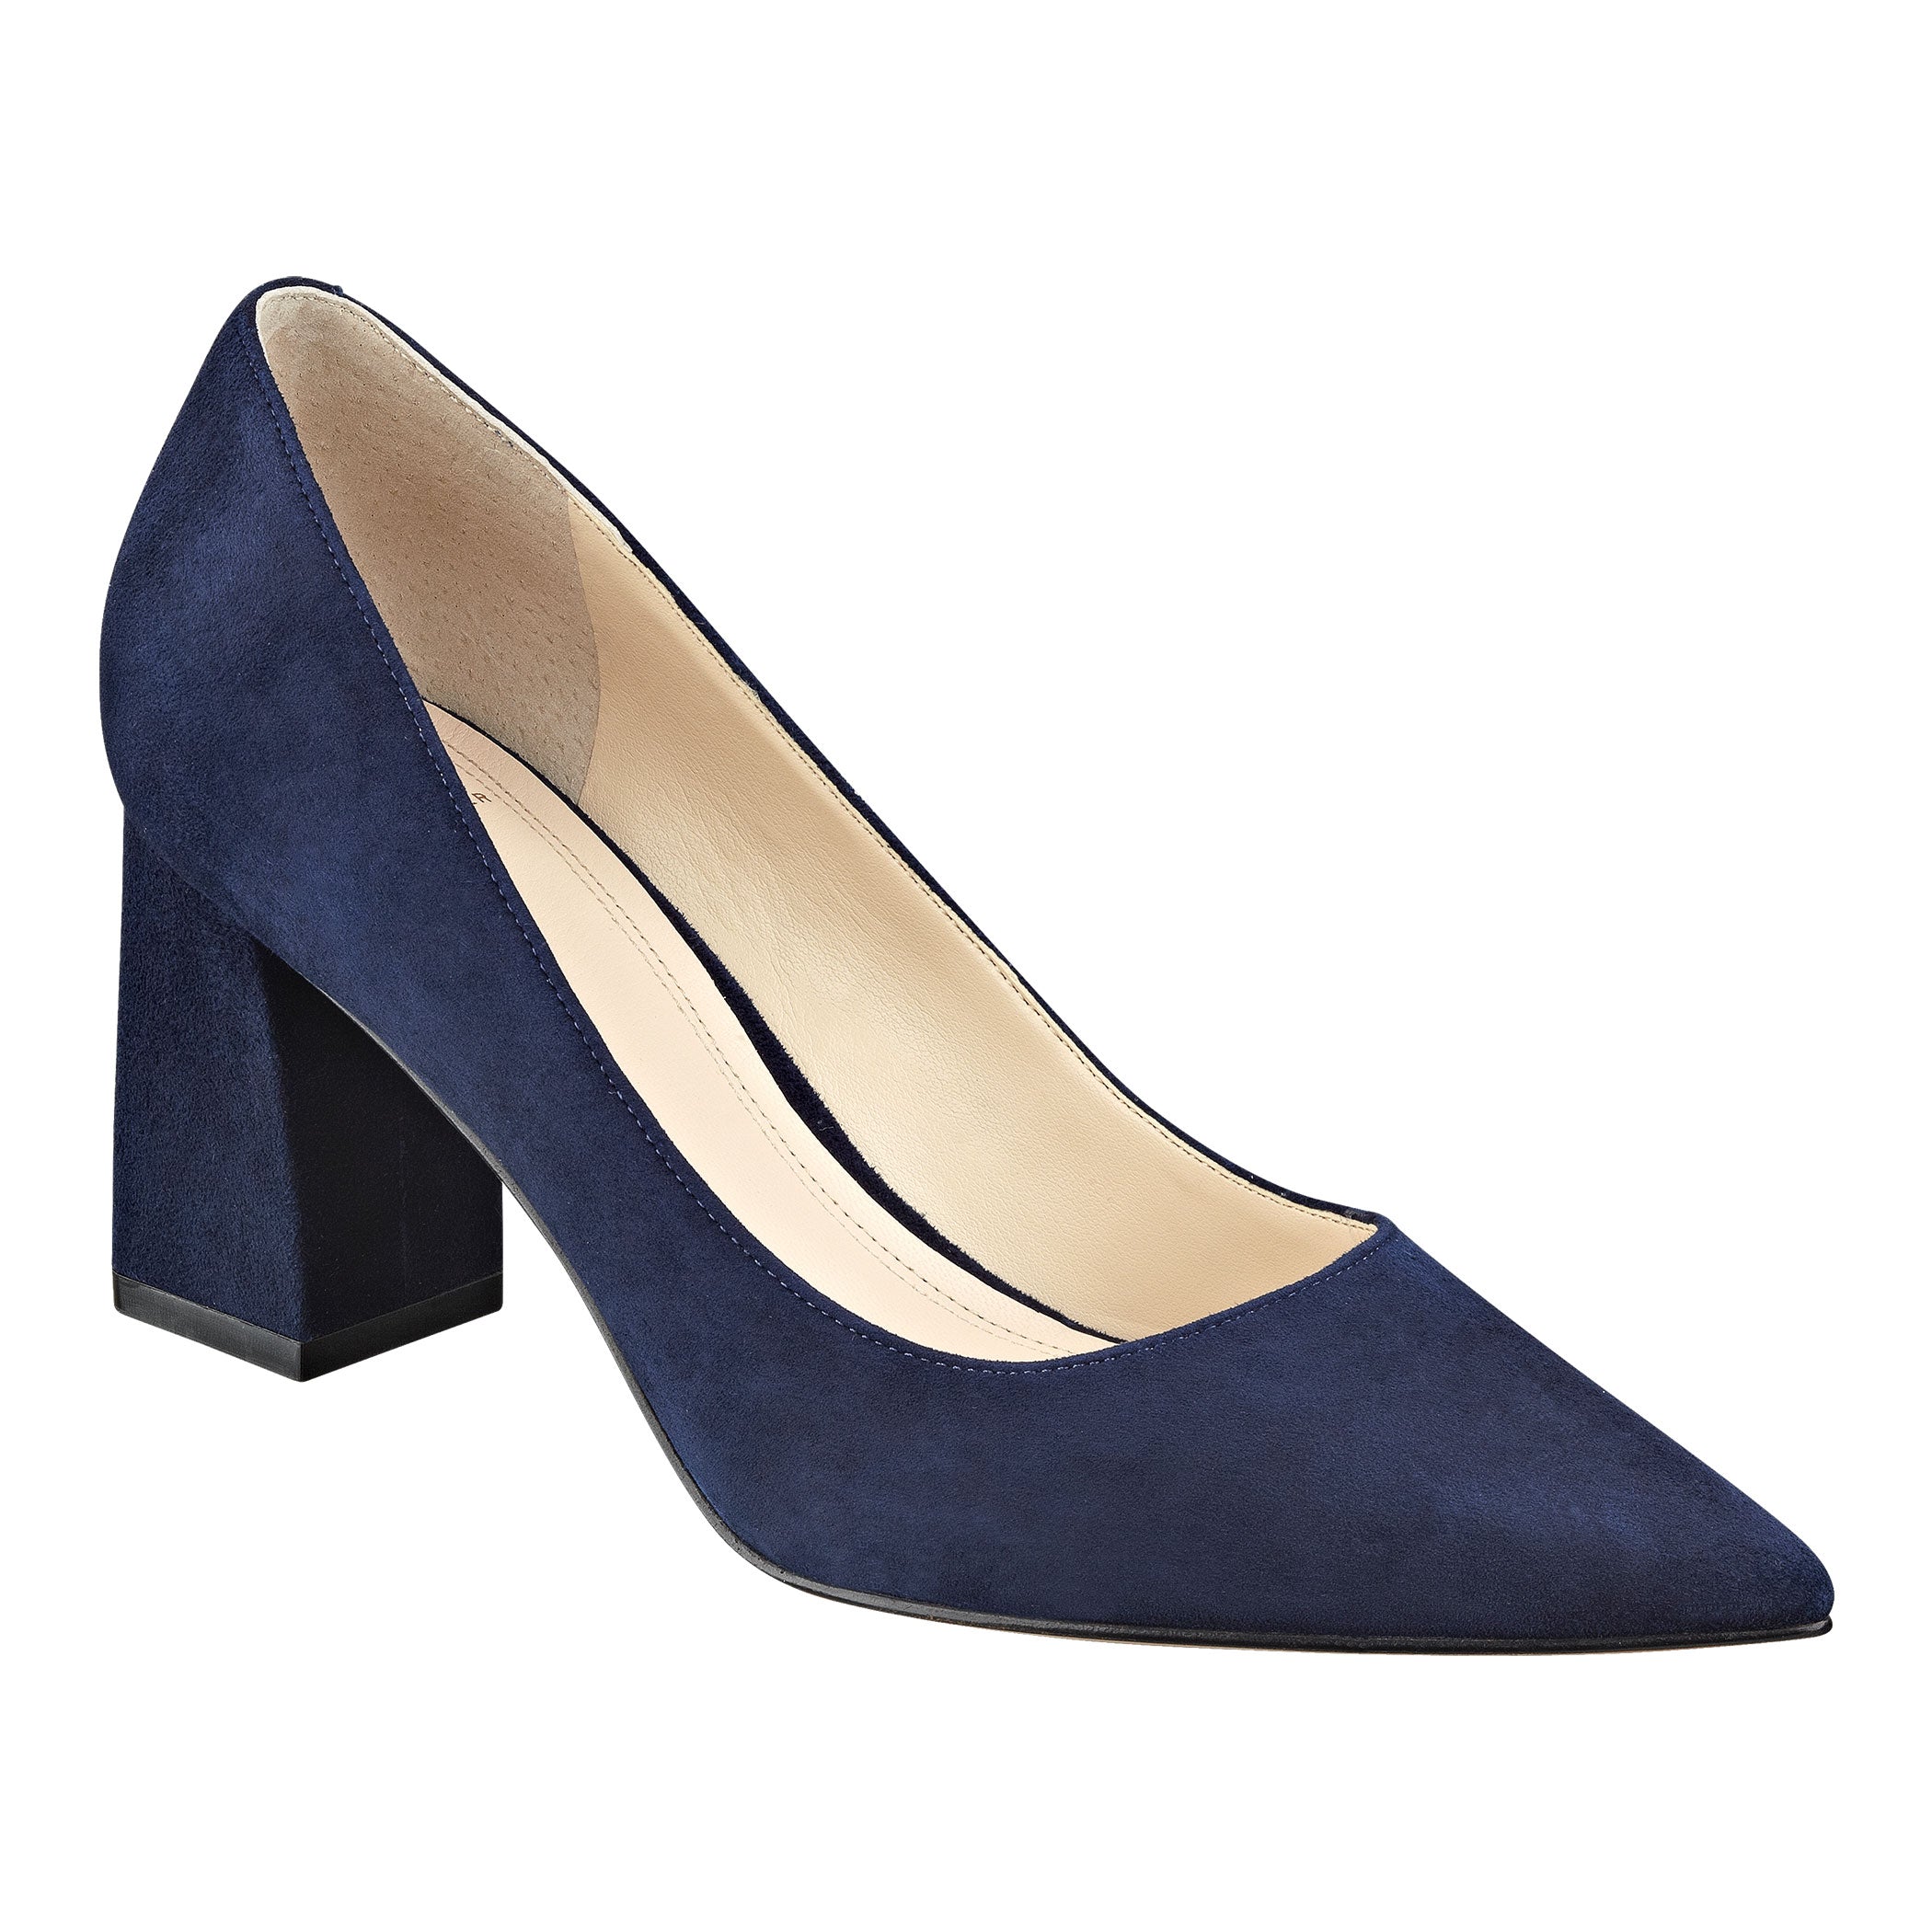 Faux-Suede Ankle-Strap High-Heel Shoes For Women | Old Navy